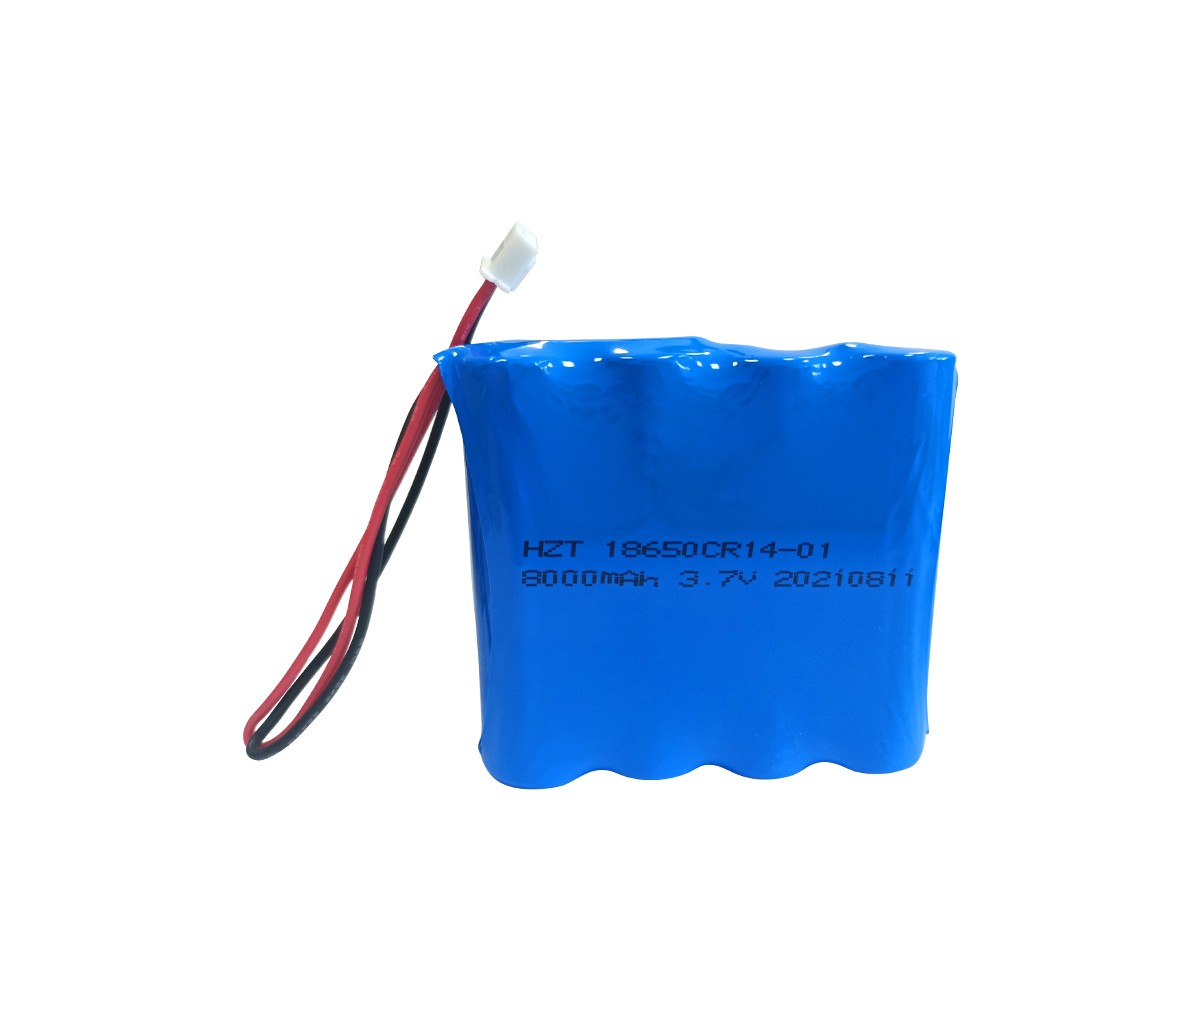 Electronic scale lithium battery pack